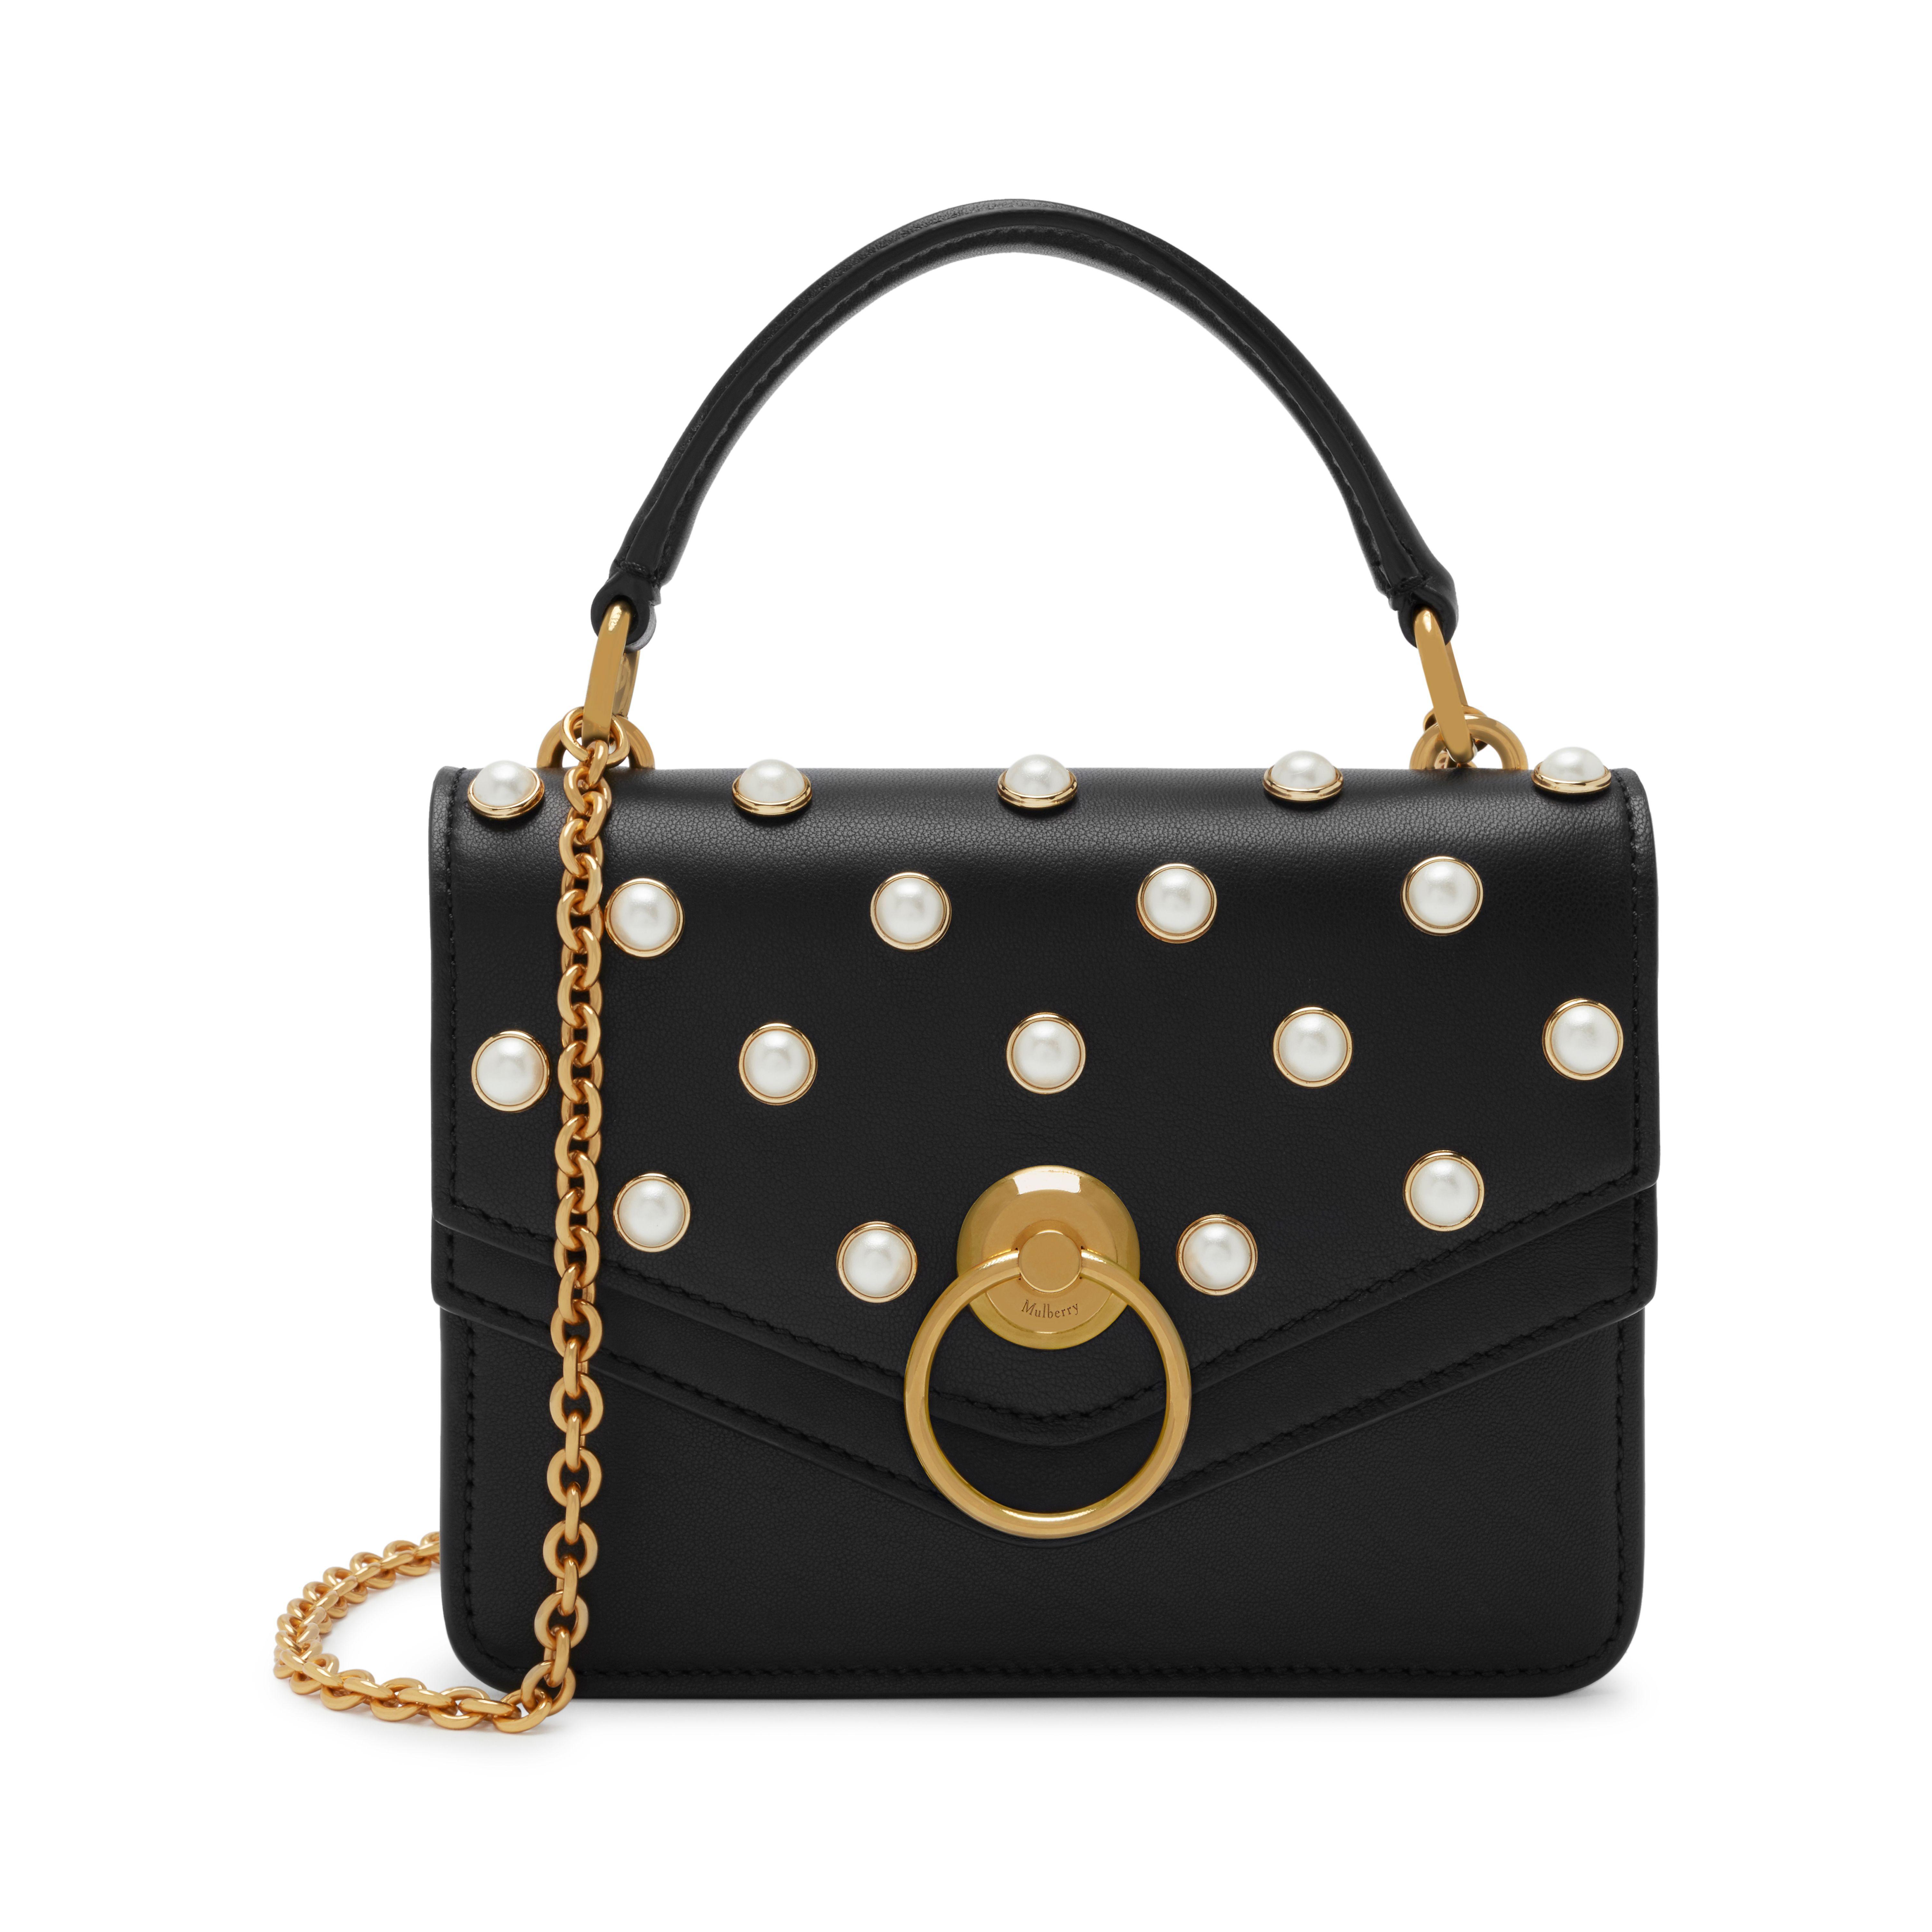 Lyst - Mulberry Small Harlow in Black